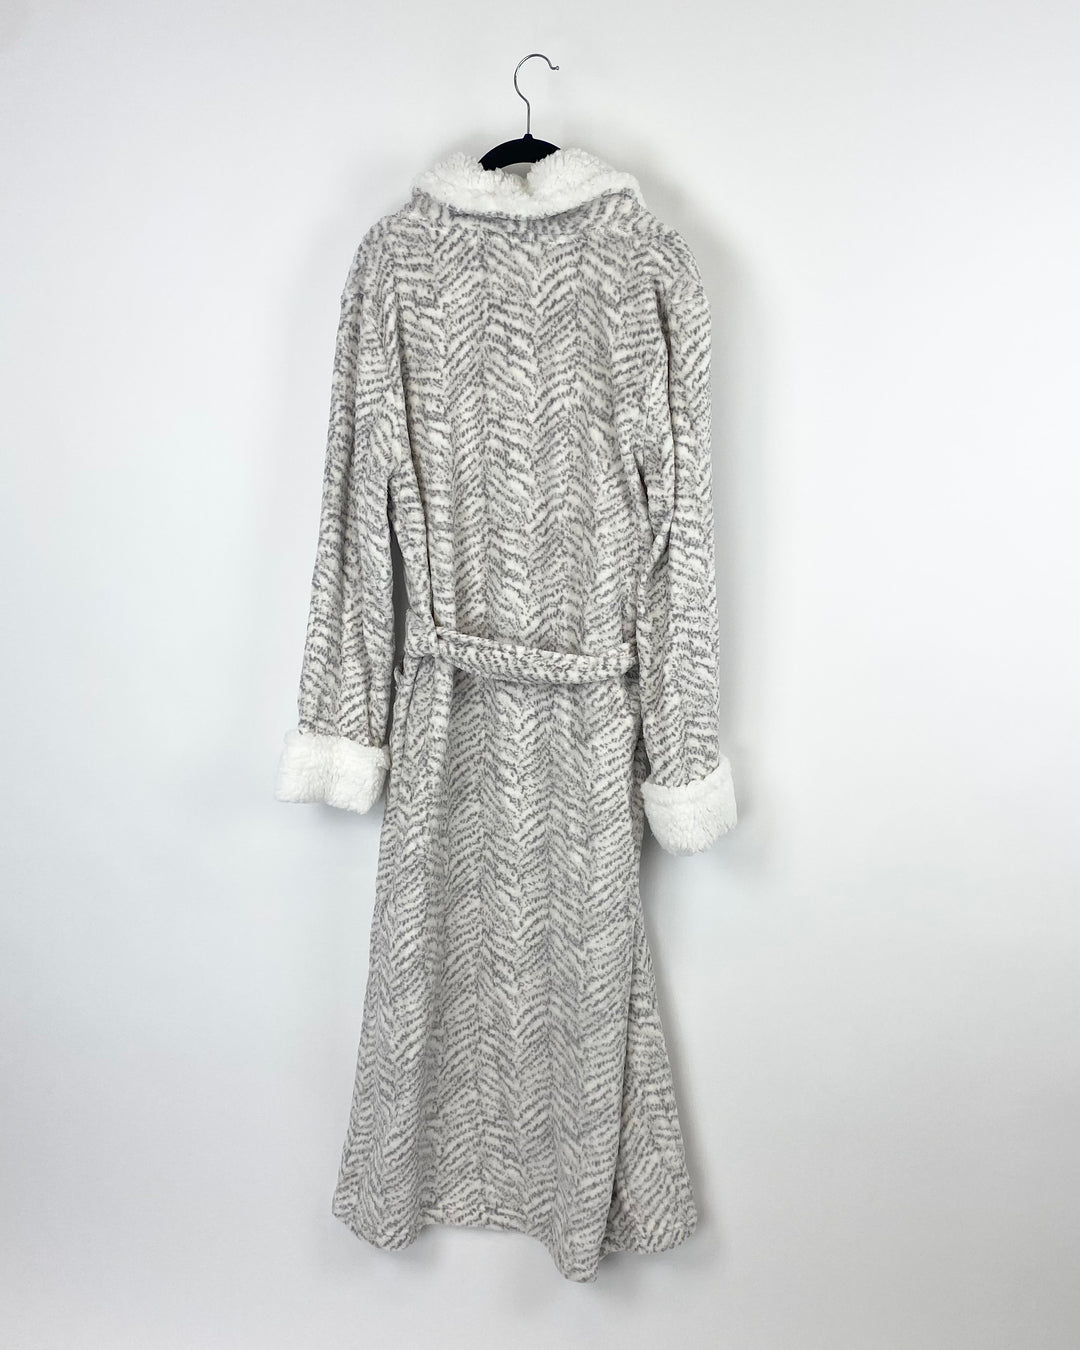 Grey and White Robe - Size 6/8